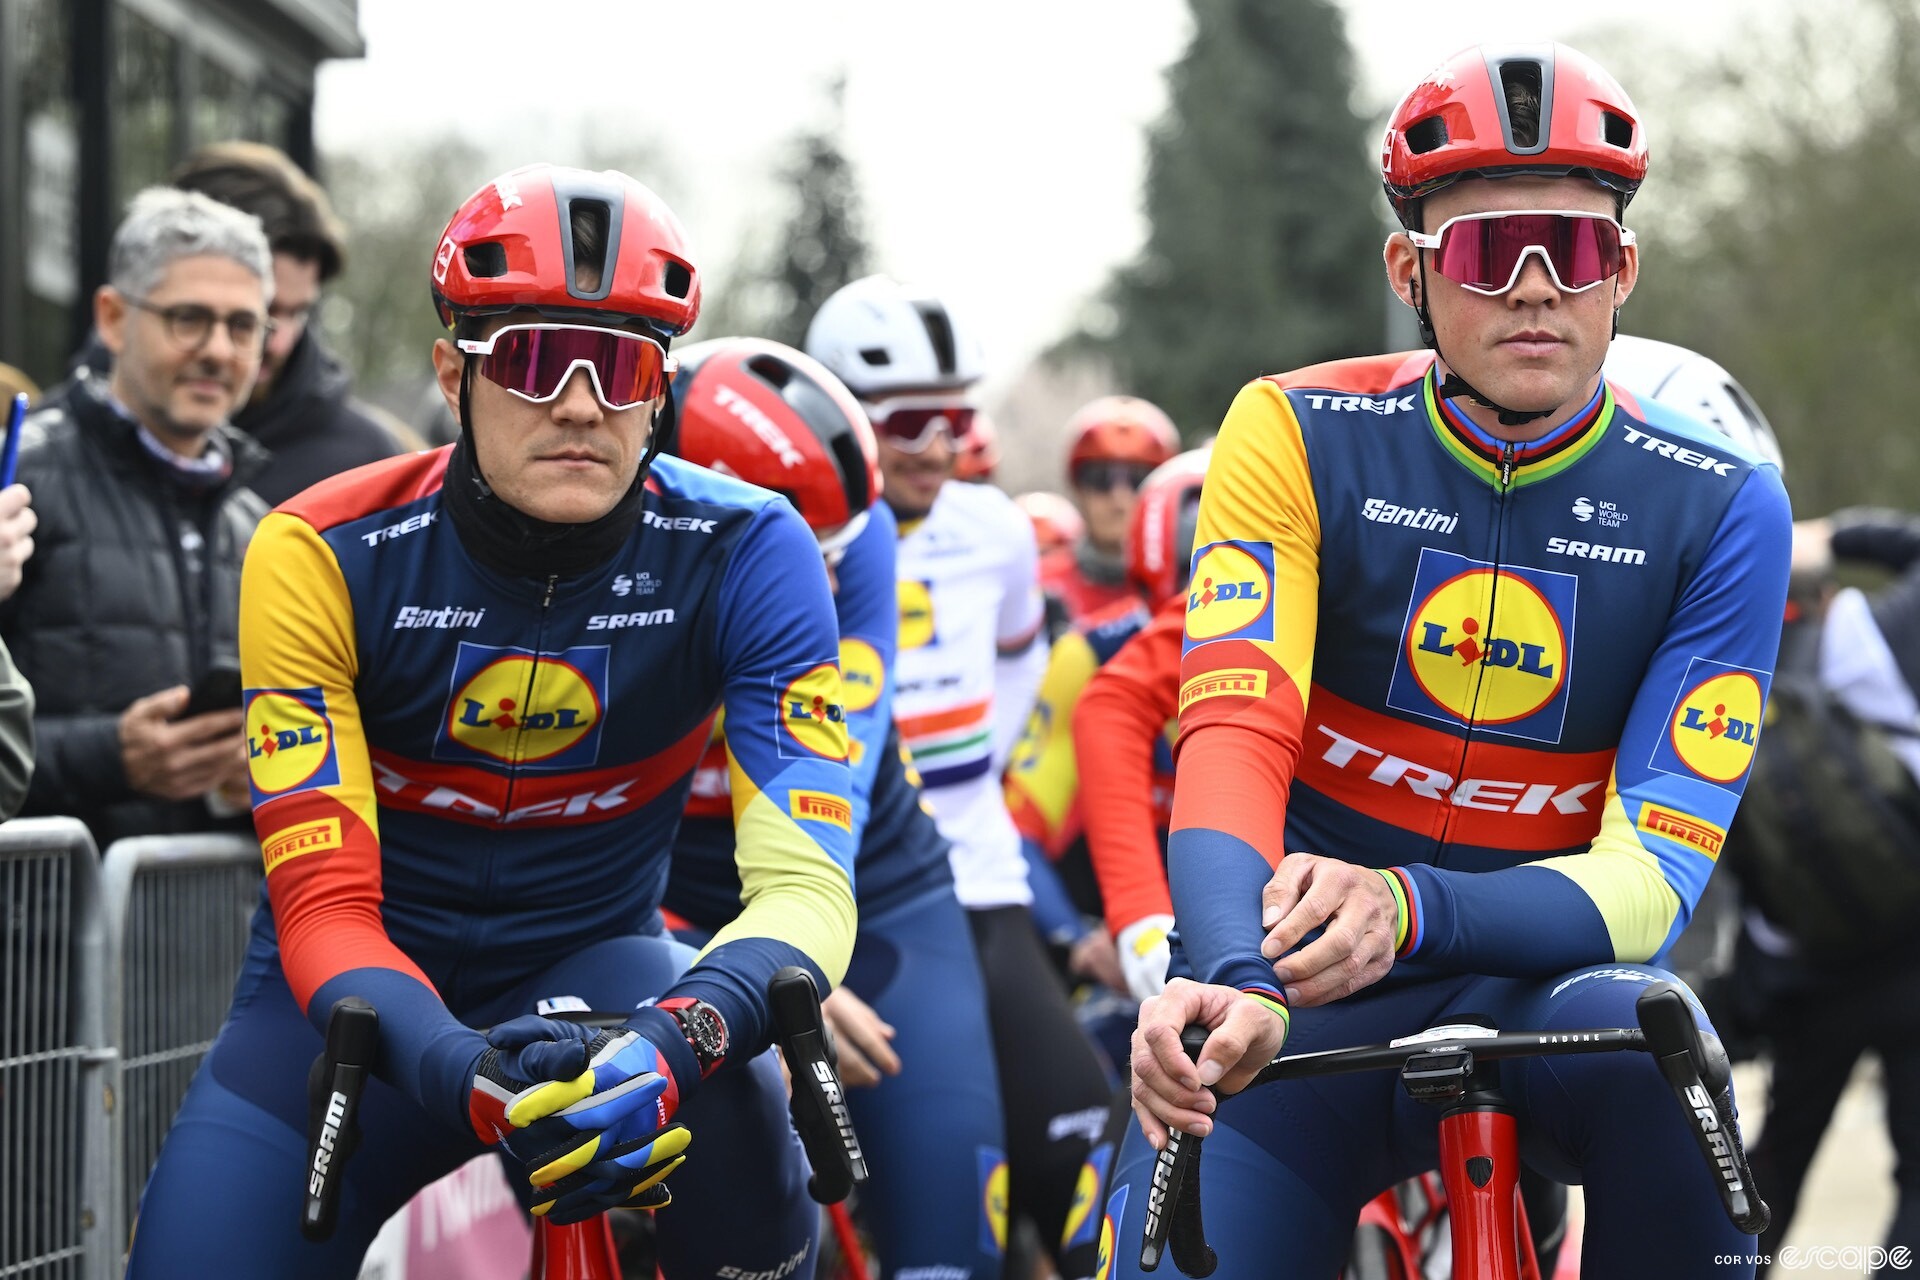 Jasper Stuyven and Mads Pedersen sit impassively at the start of a stage of Paris-Nice. Their eyes are hiddenn behind large sunglasses, and both are dressed warmly against a cloudy, cold sky.